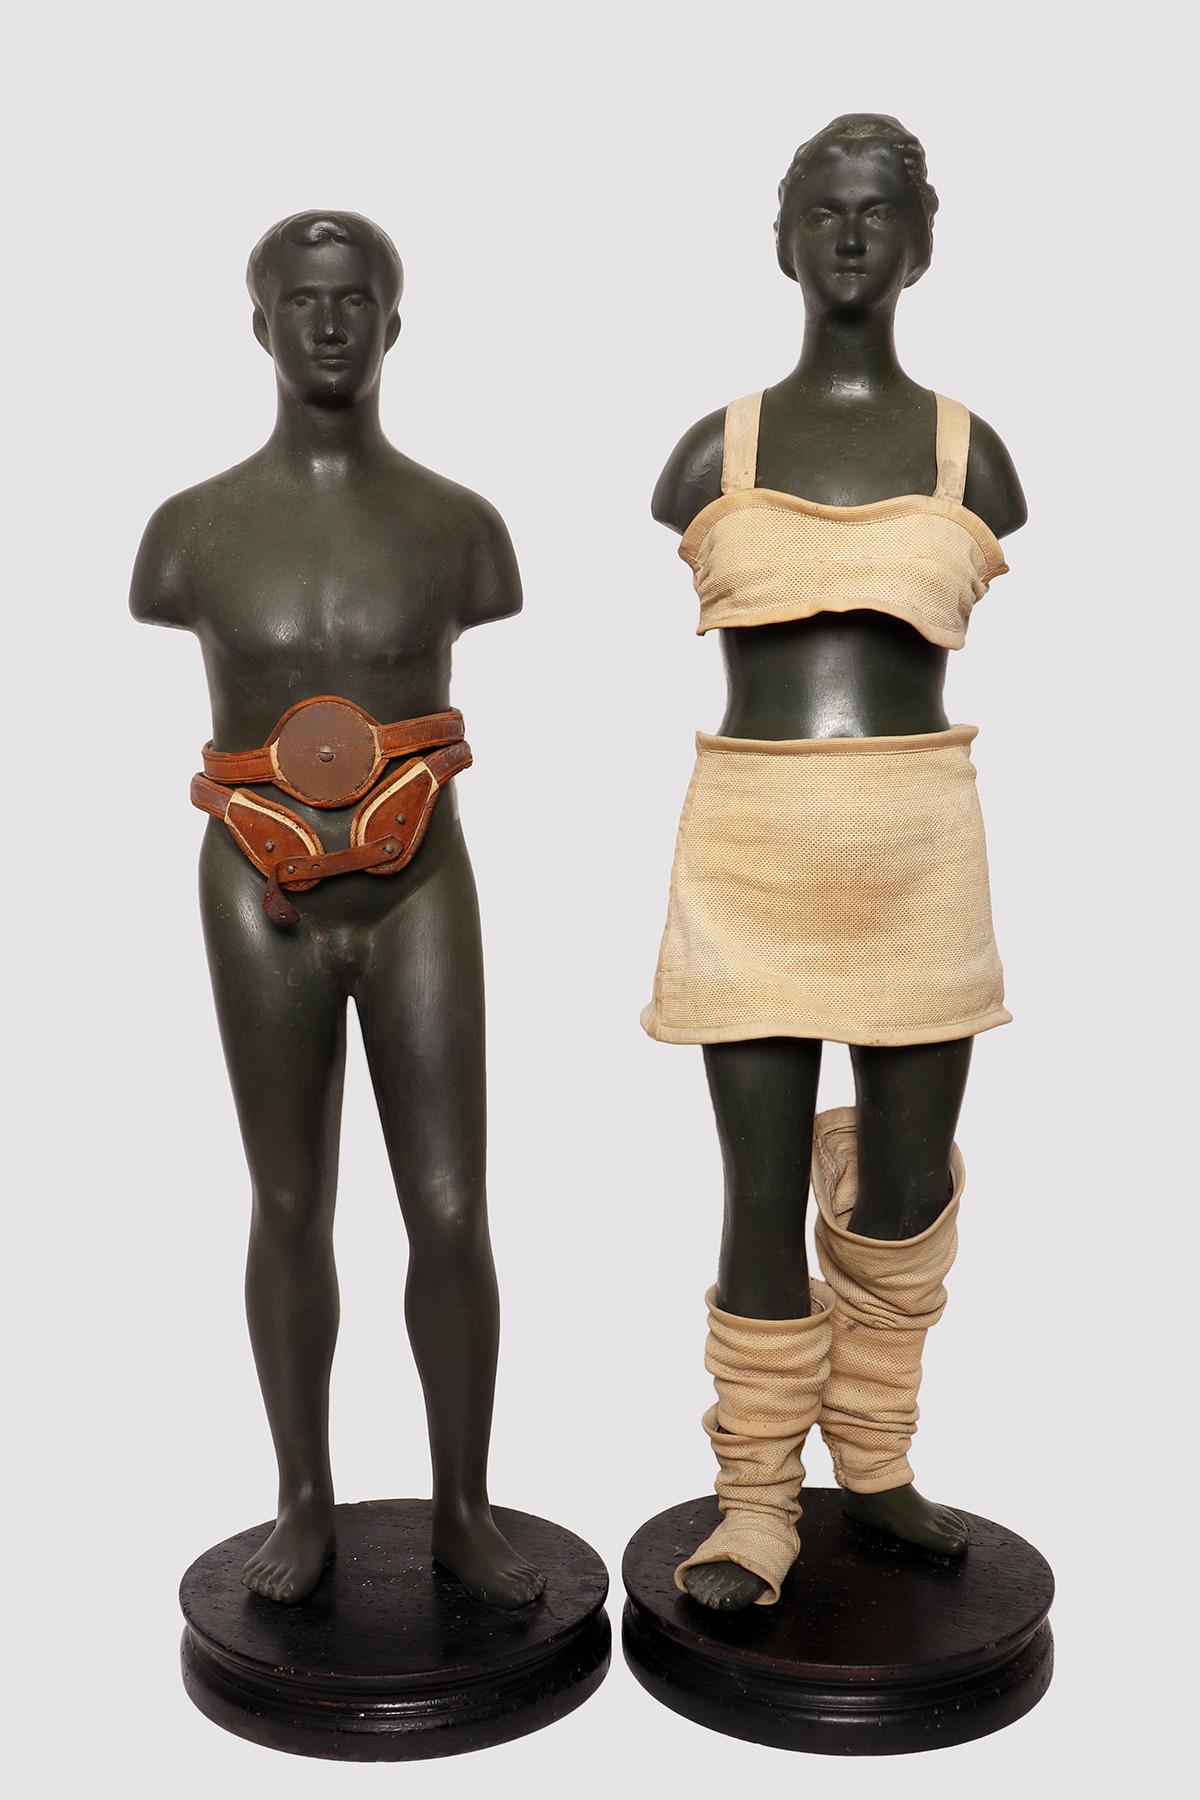 Fruitwood Advertising mannequin for elastic and containment belts, France 1920.